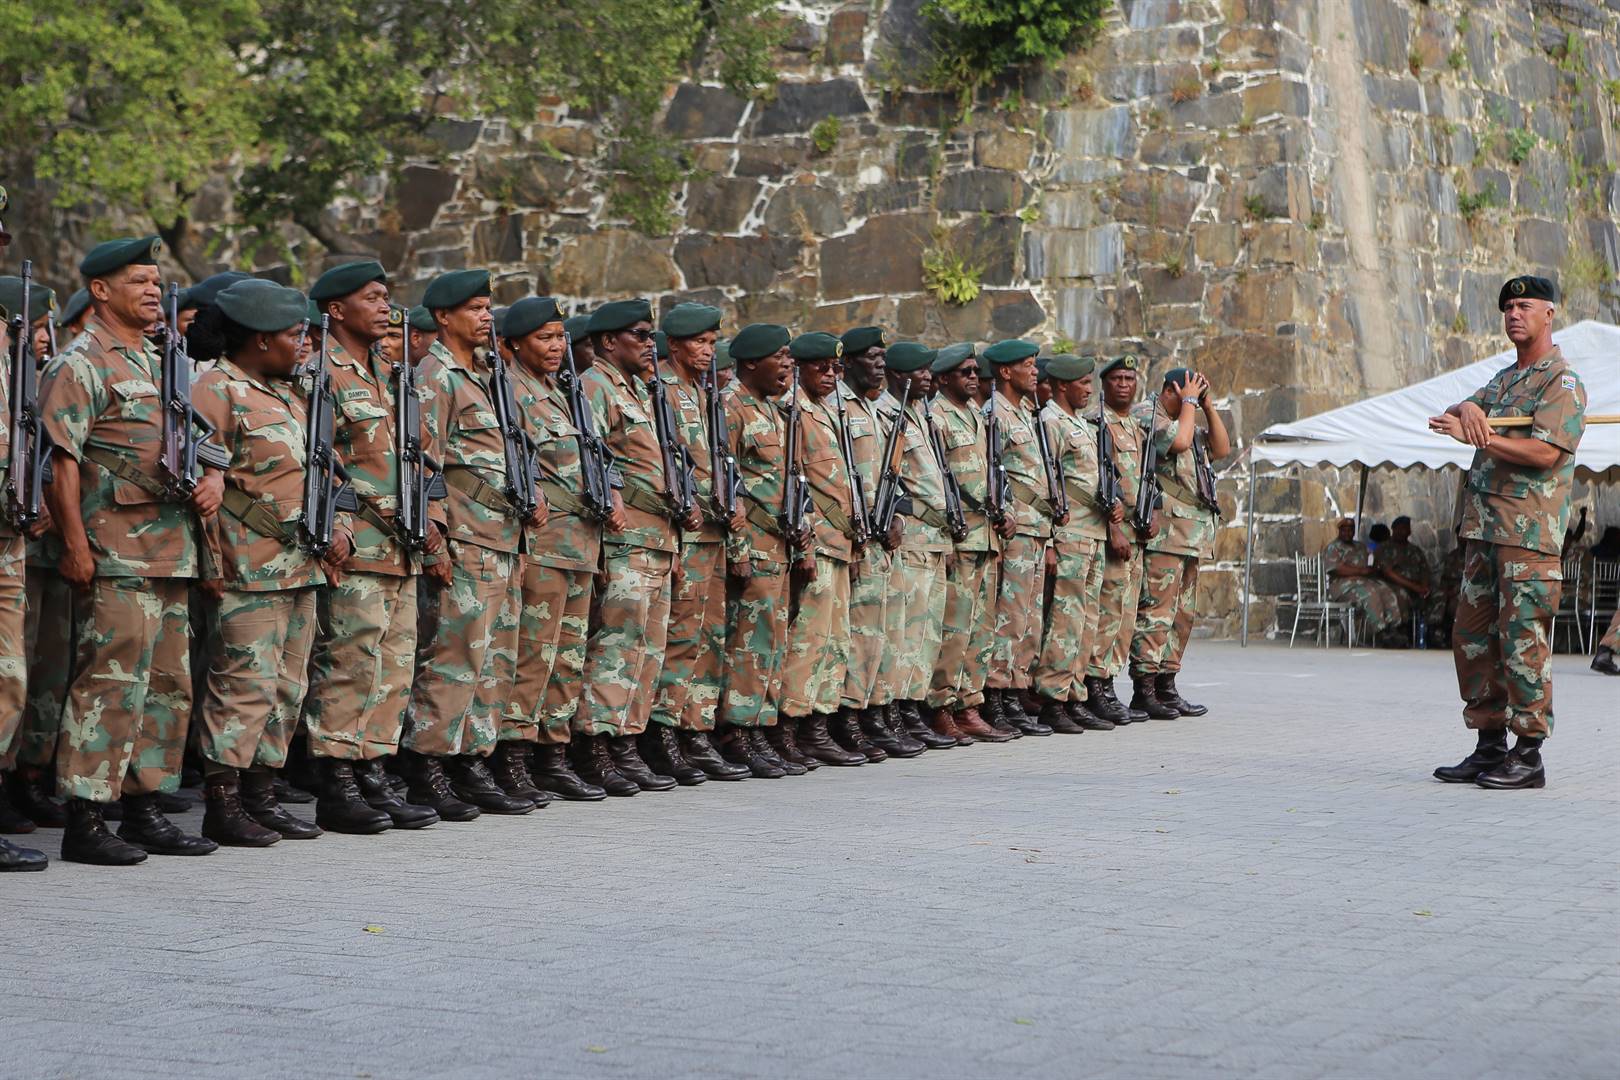 News24 | Mpumelelo Mkhabela | More than uniforms: Urgent call for true commitment to the SANDF